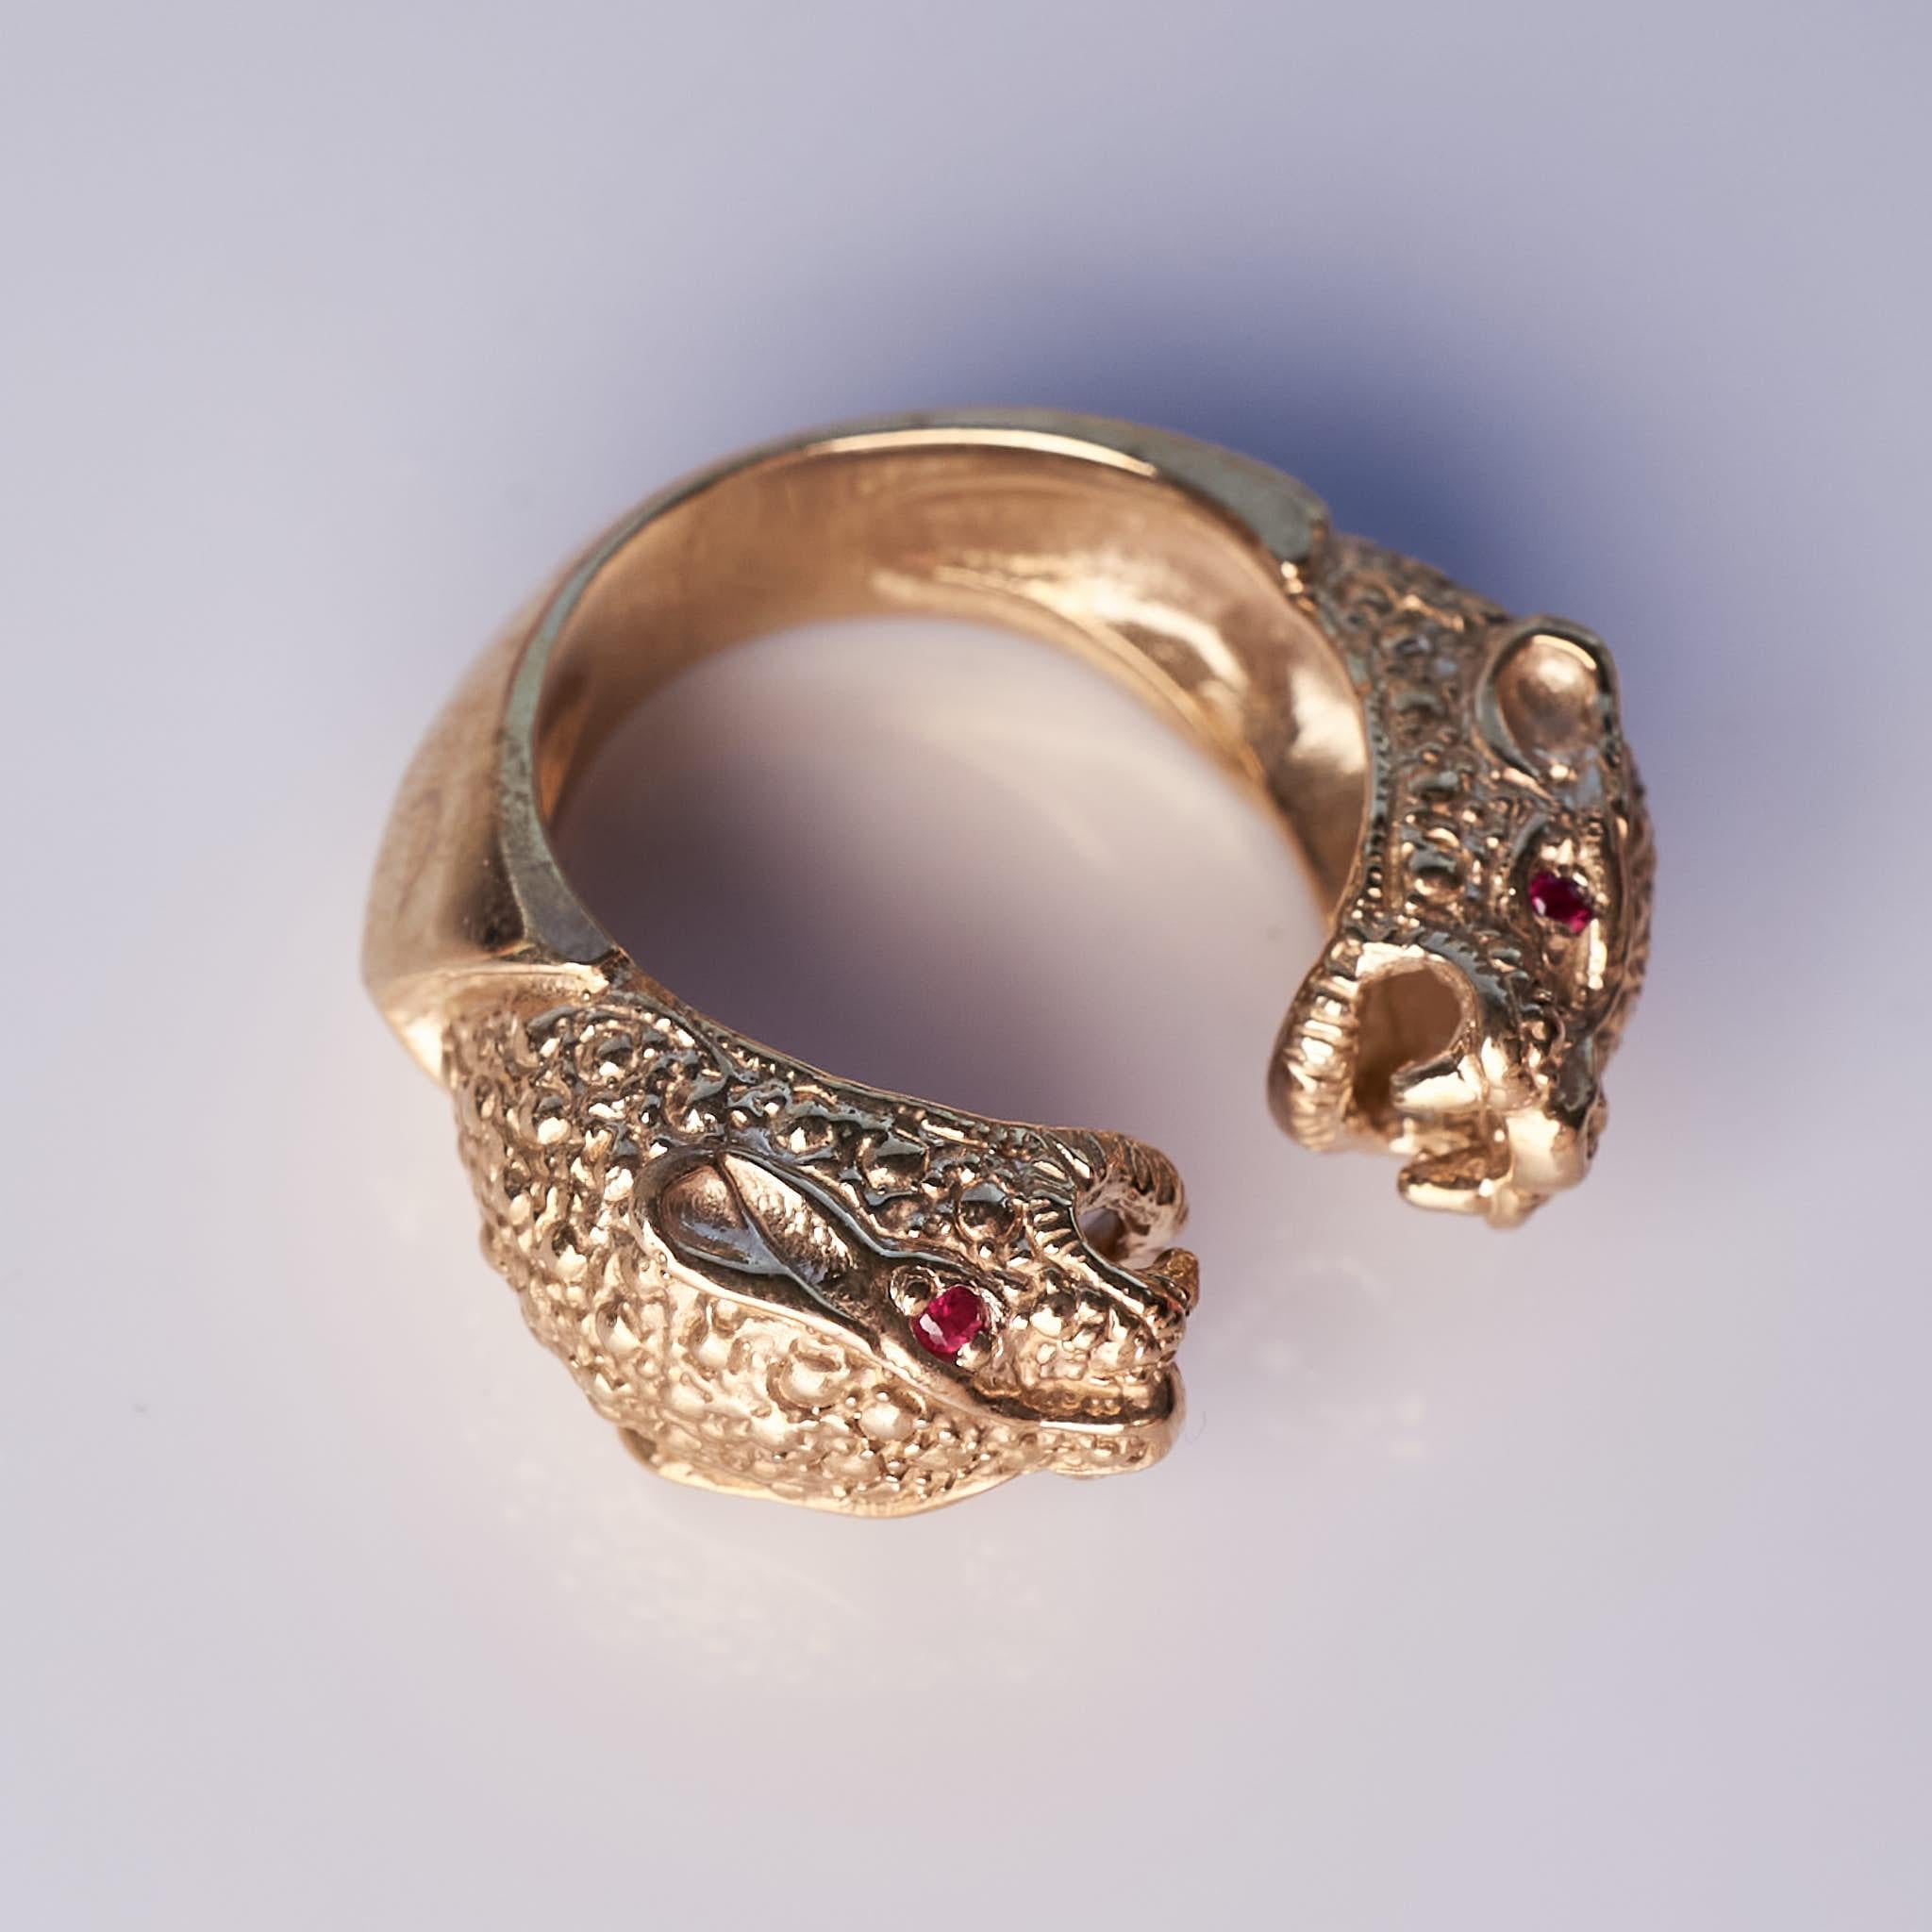 Contemporary Ruby Jaguar Ring Bronze Animal J Dauphin For Sale